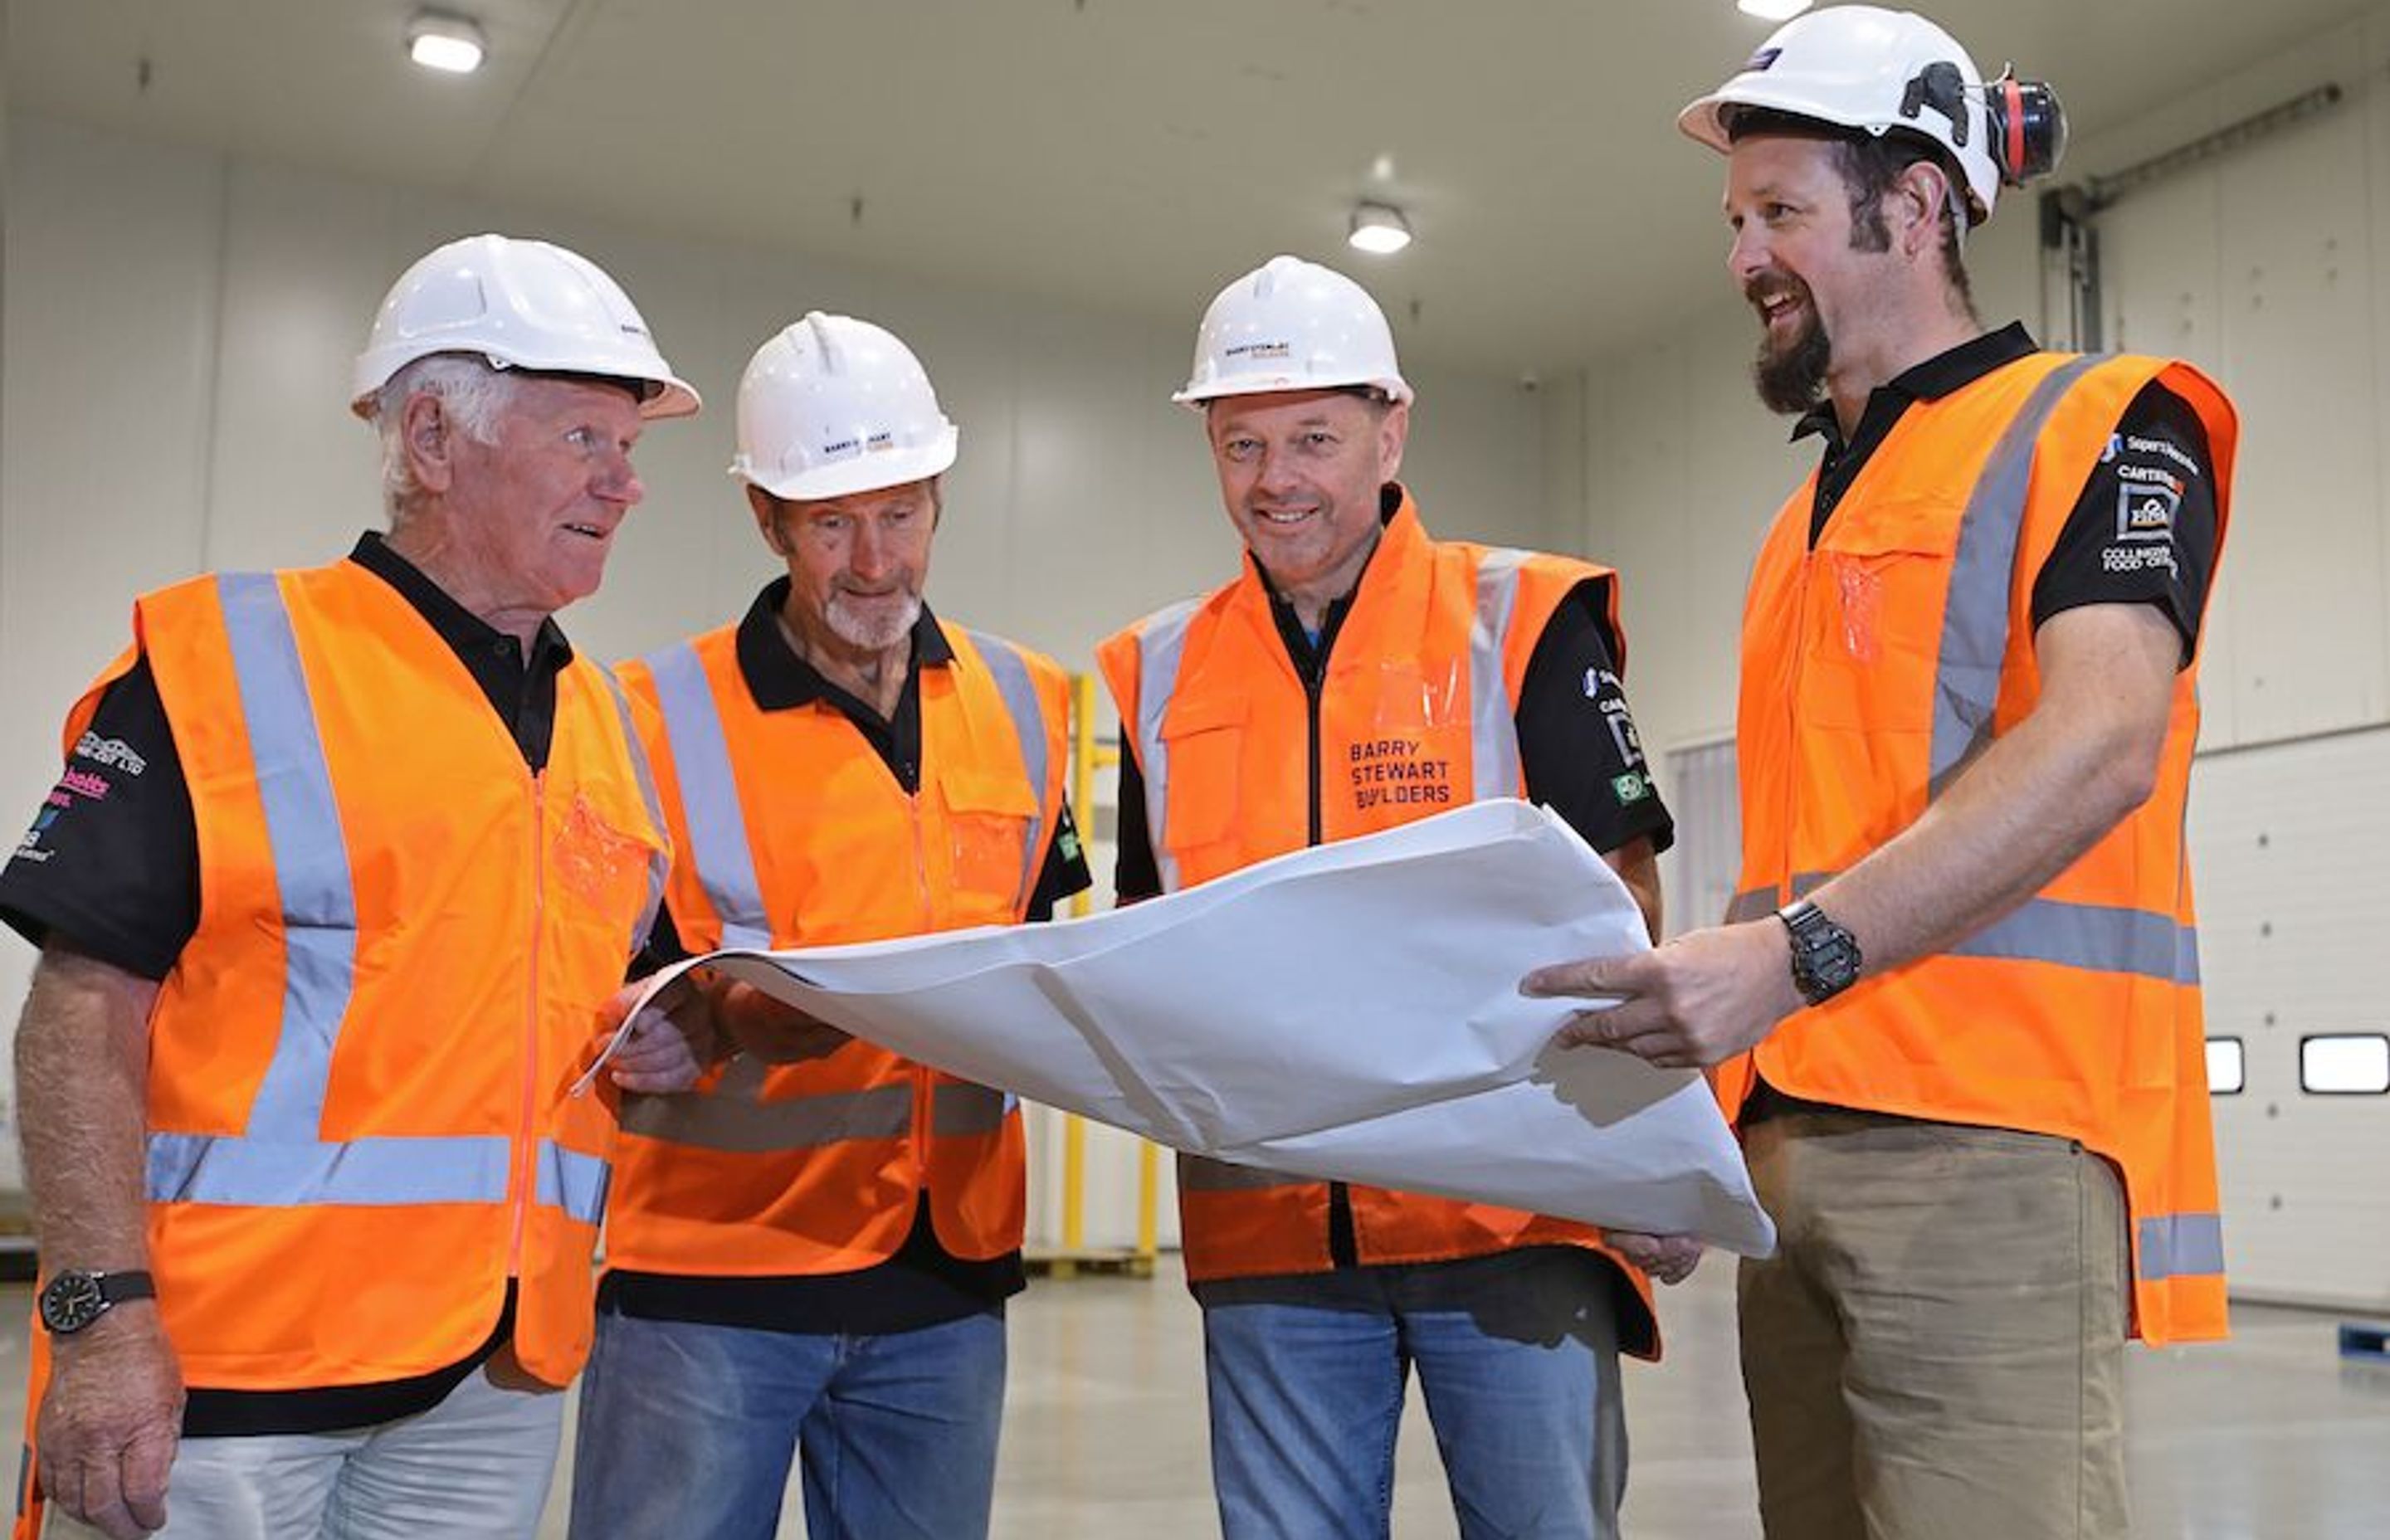 Barry Stewart (second from right) and the team inspecting the completed Bidfood Distribution Centre in 2017

